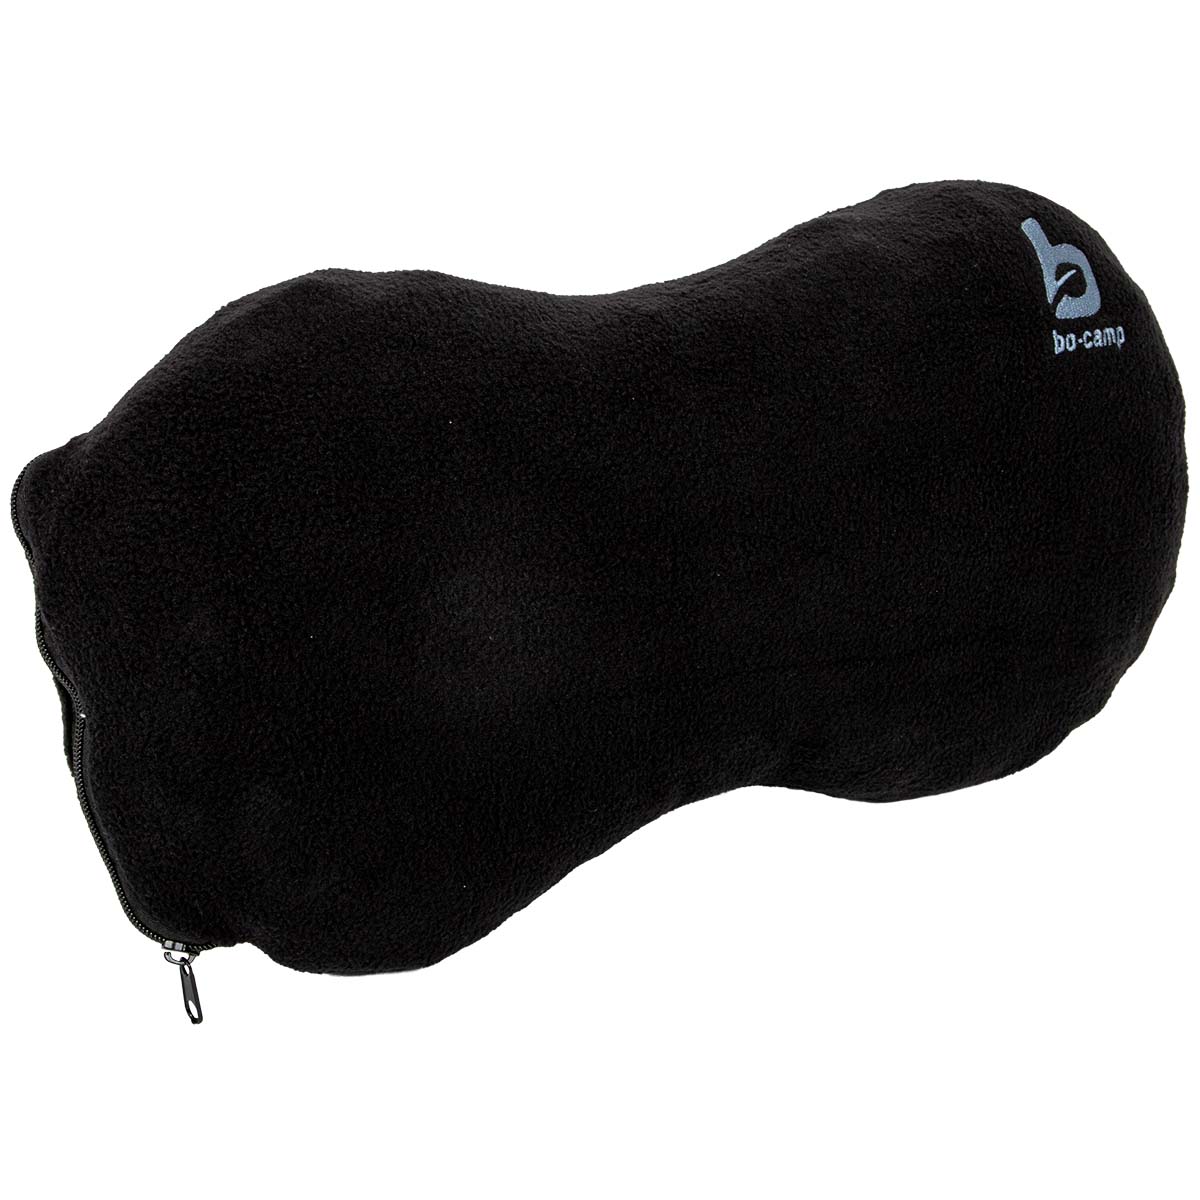 3506631 An inflatable pillow with loose cover. The fleece cover of this pillow provides optimal comfort and durable use. By deflating the pillow after use it is compact to carry.